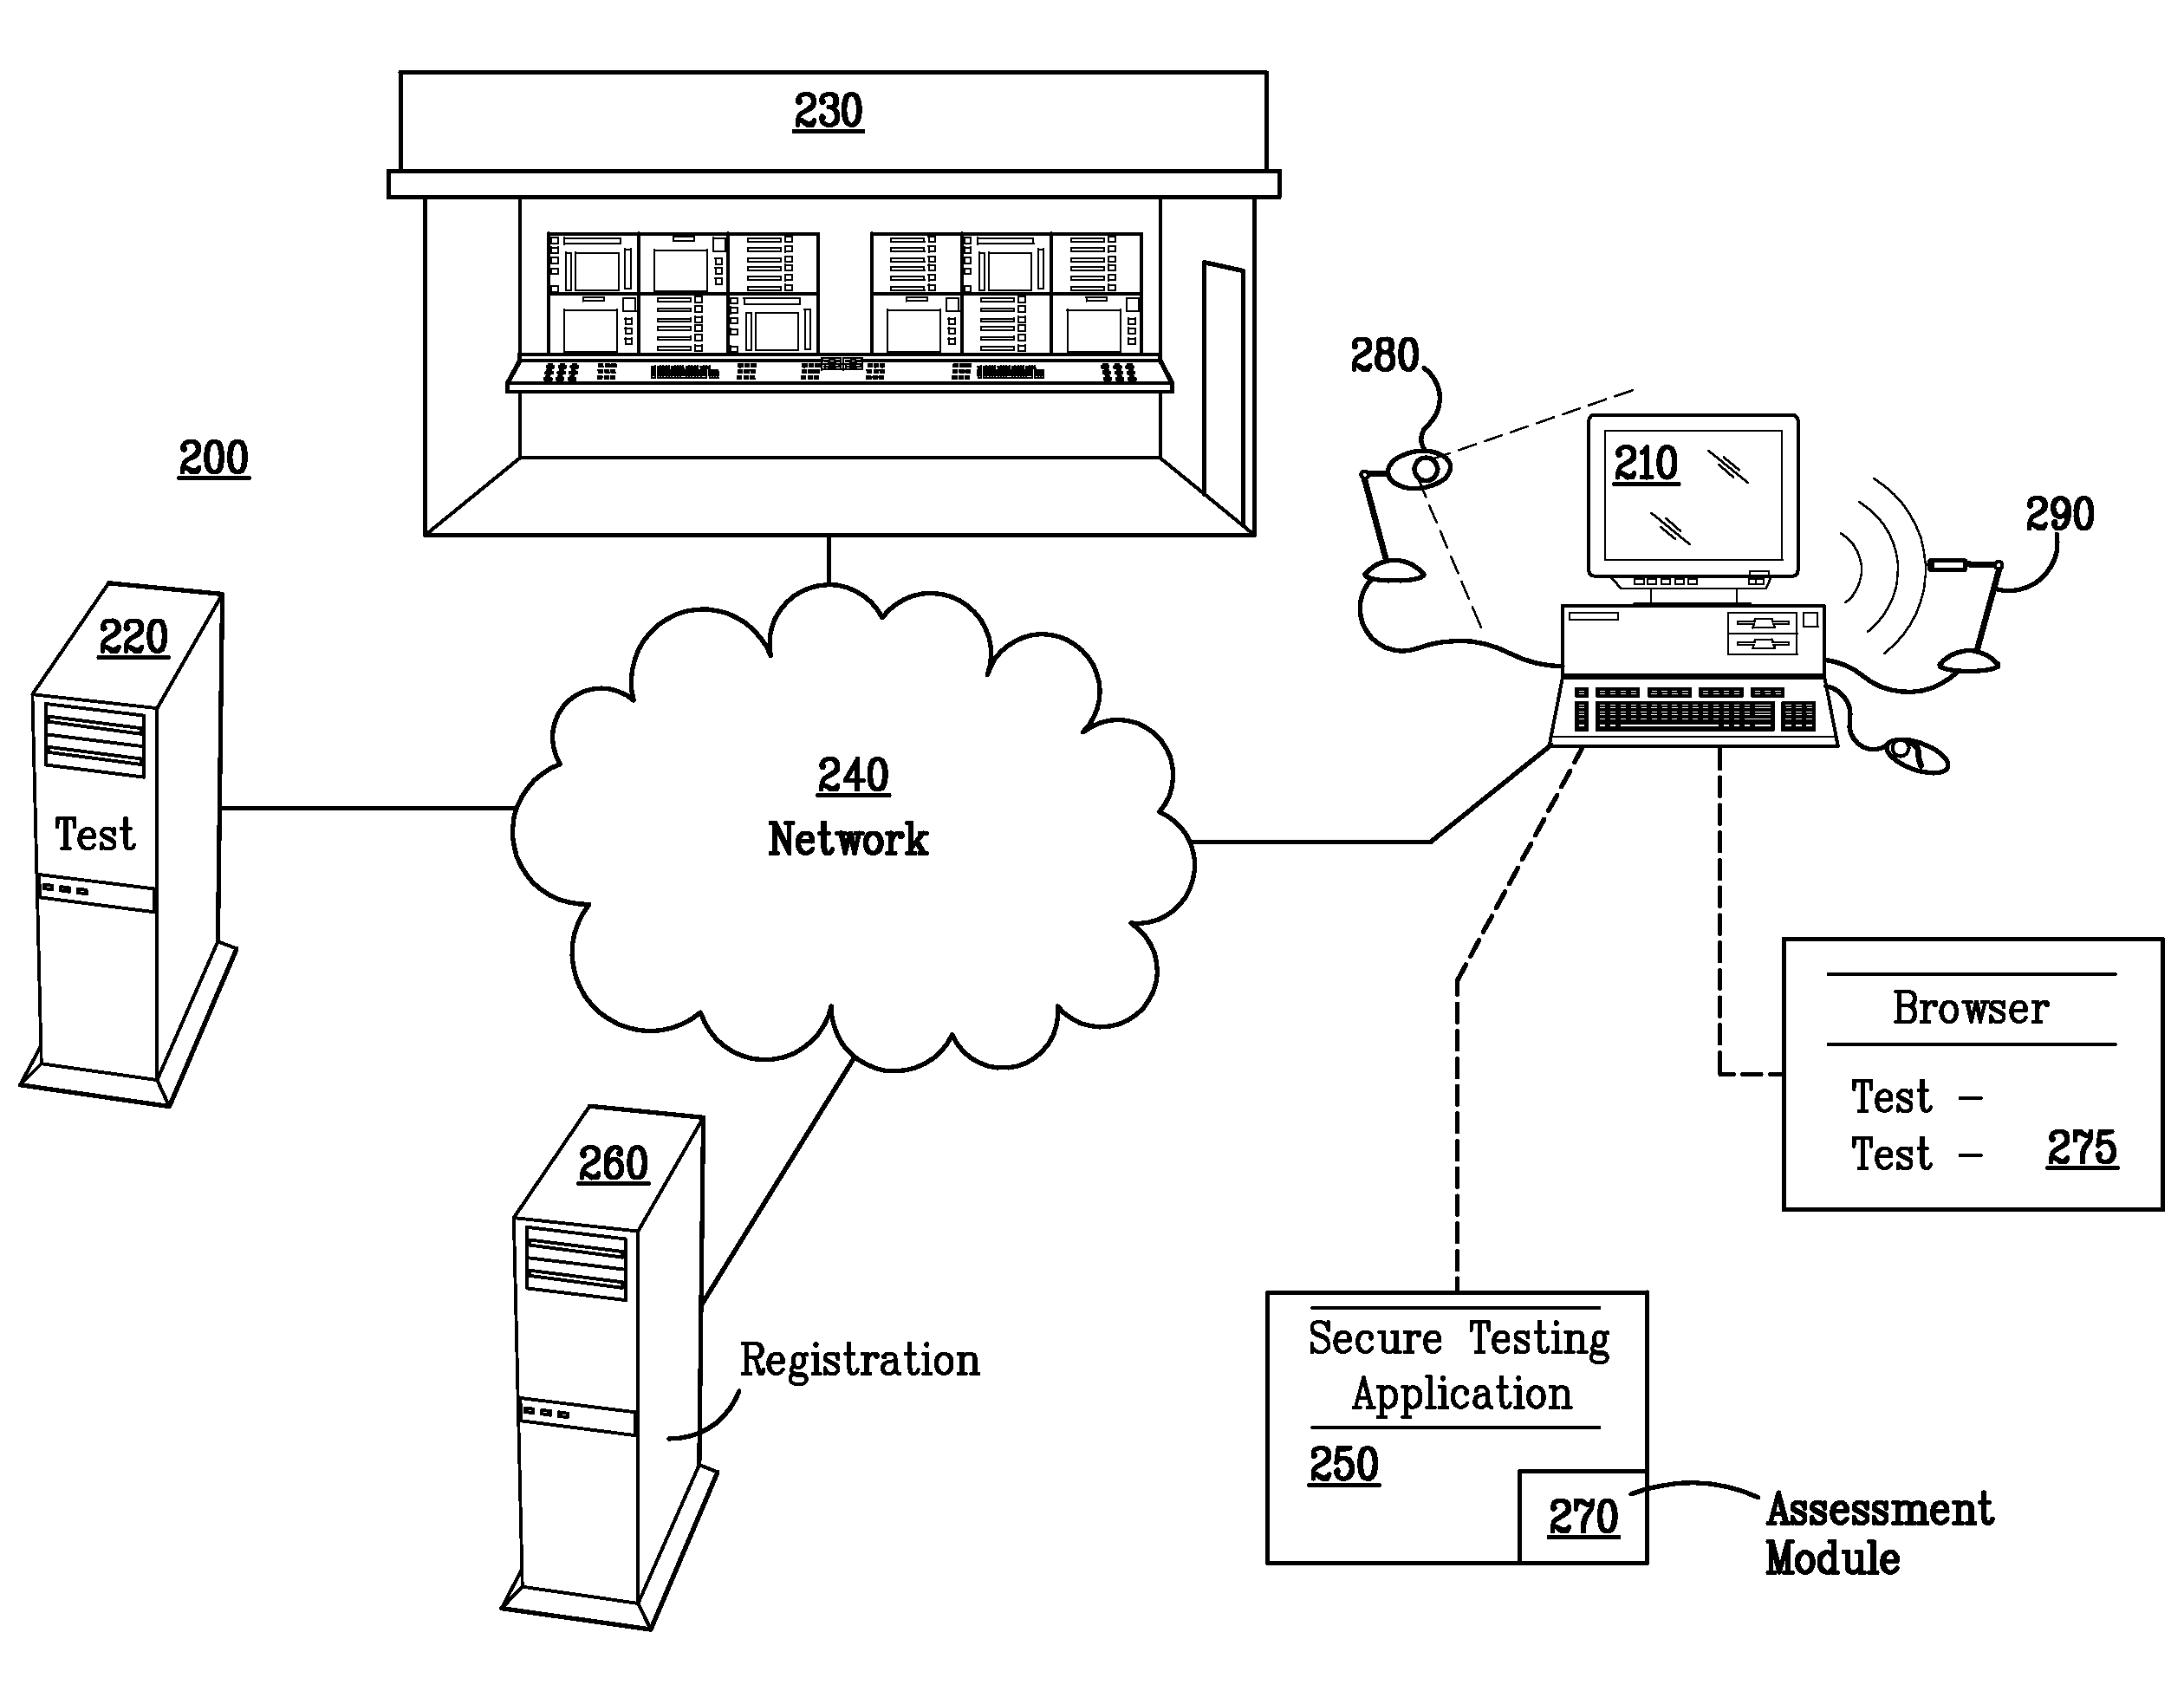 Maintaining a Secure Computing Device in a Test Taking Environment